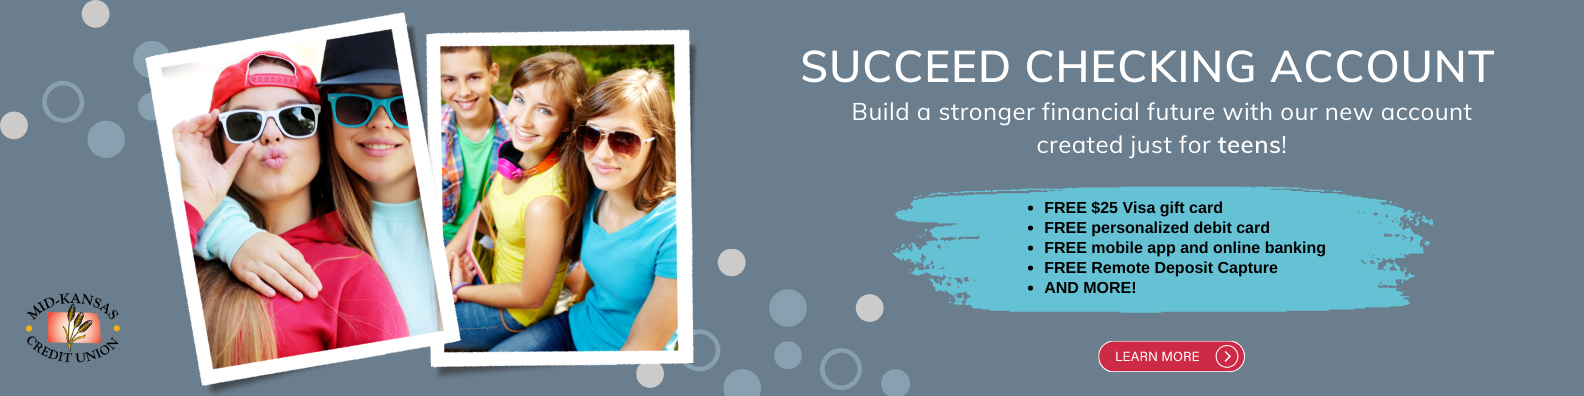 succeed checking account. Build a stronger financial future with our new account created just for teens! FREE $25 Visa gift card
FREE personalized debit card
FREE mobile app and online banking
FREE Remote Deposit Capture
AND MORE!